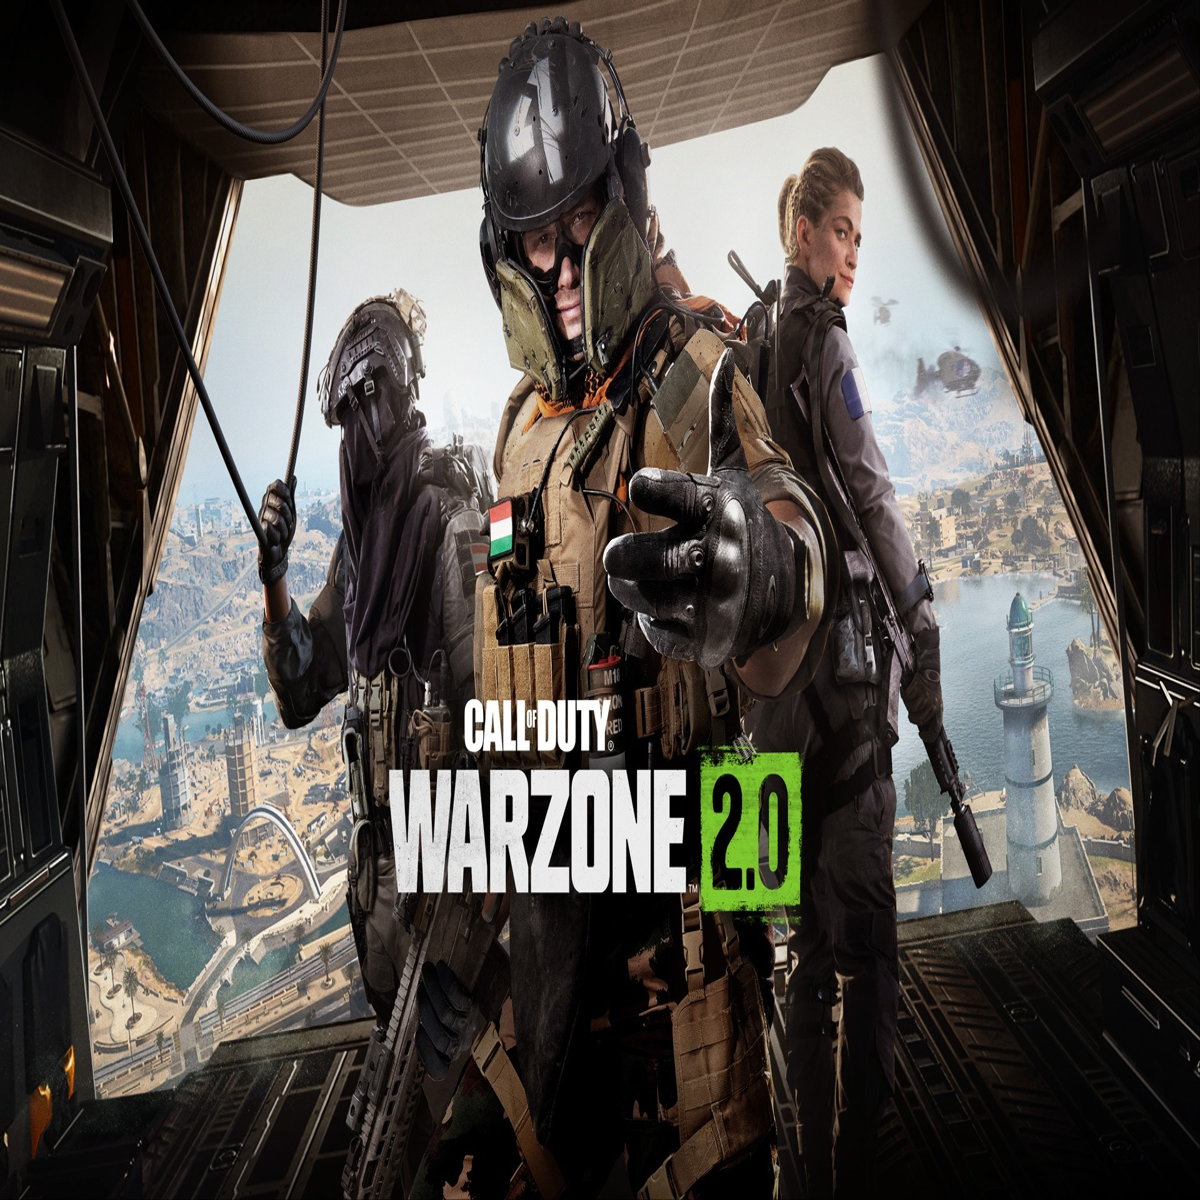 What are the system requirements needed to play Warzone 2.0?